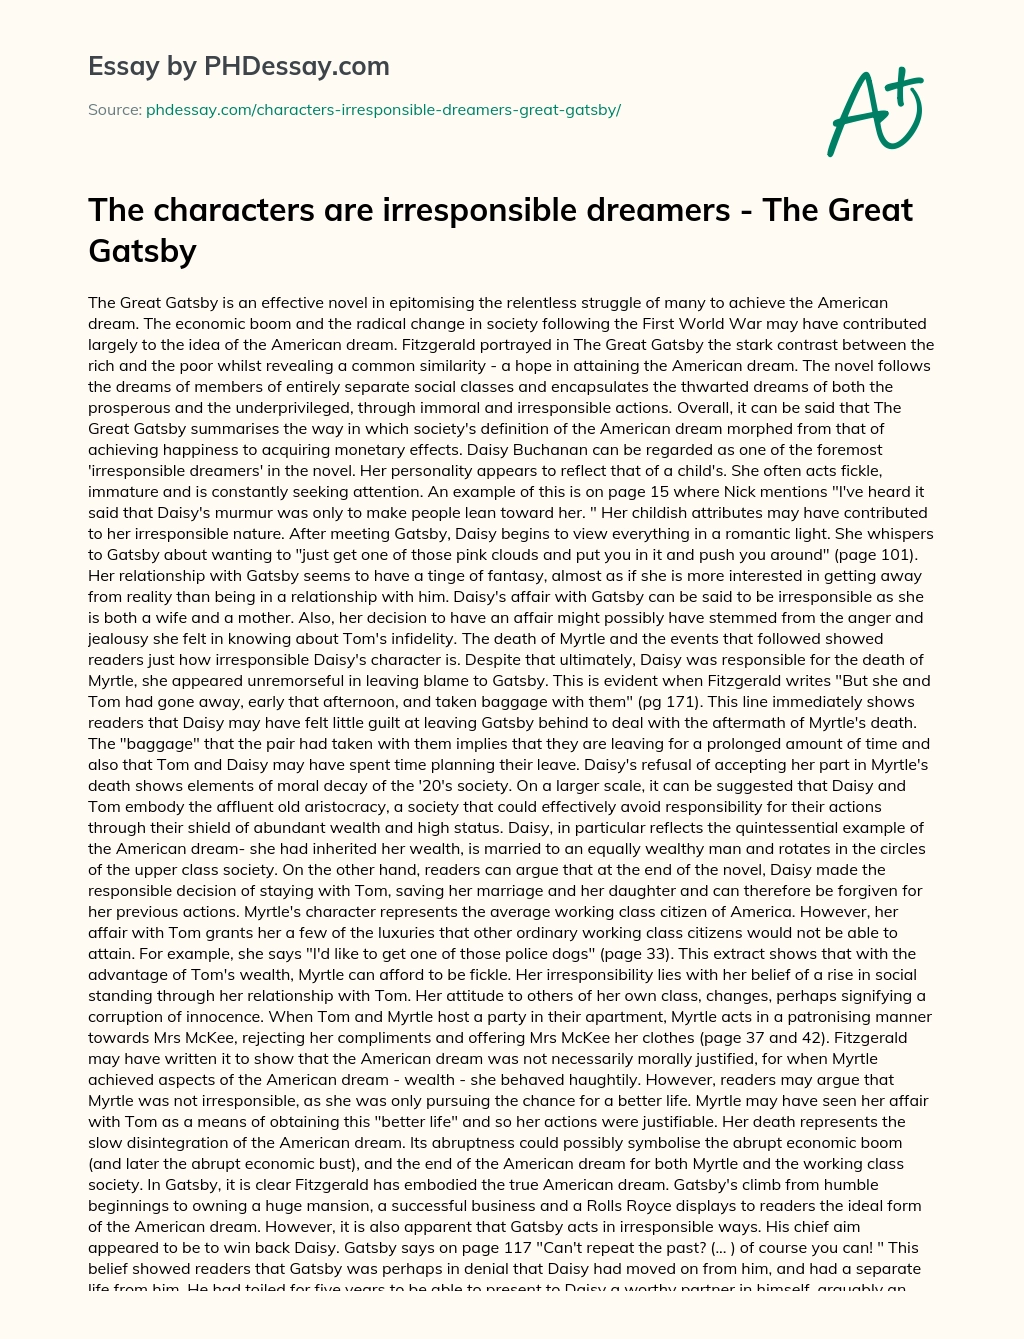 The characters are irresponsible dreamers – The Great Gatsby essay